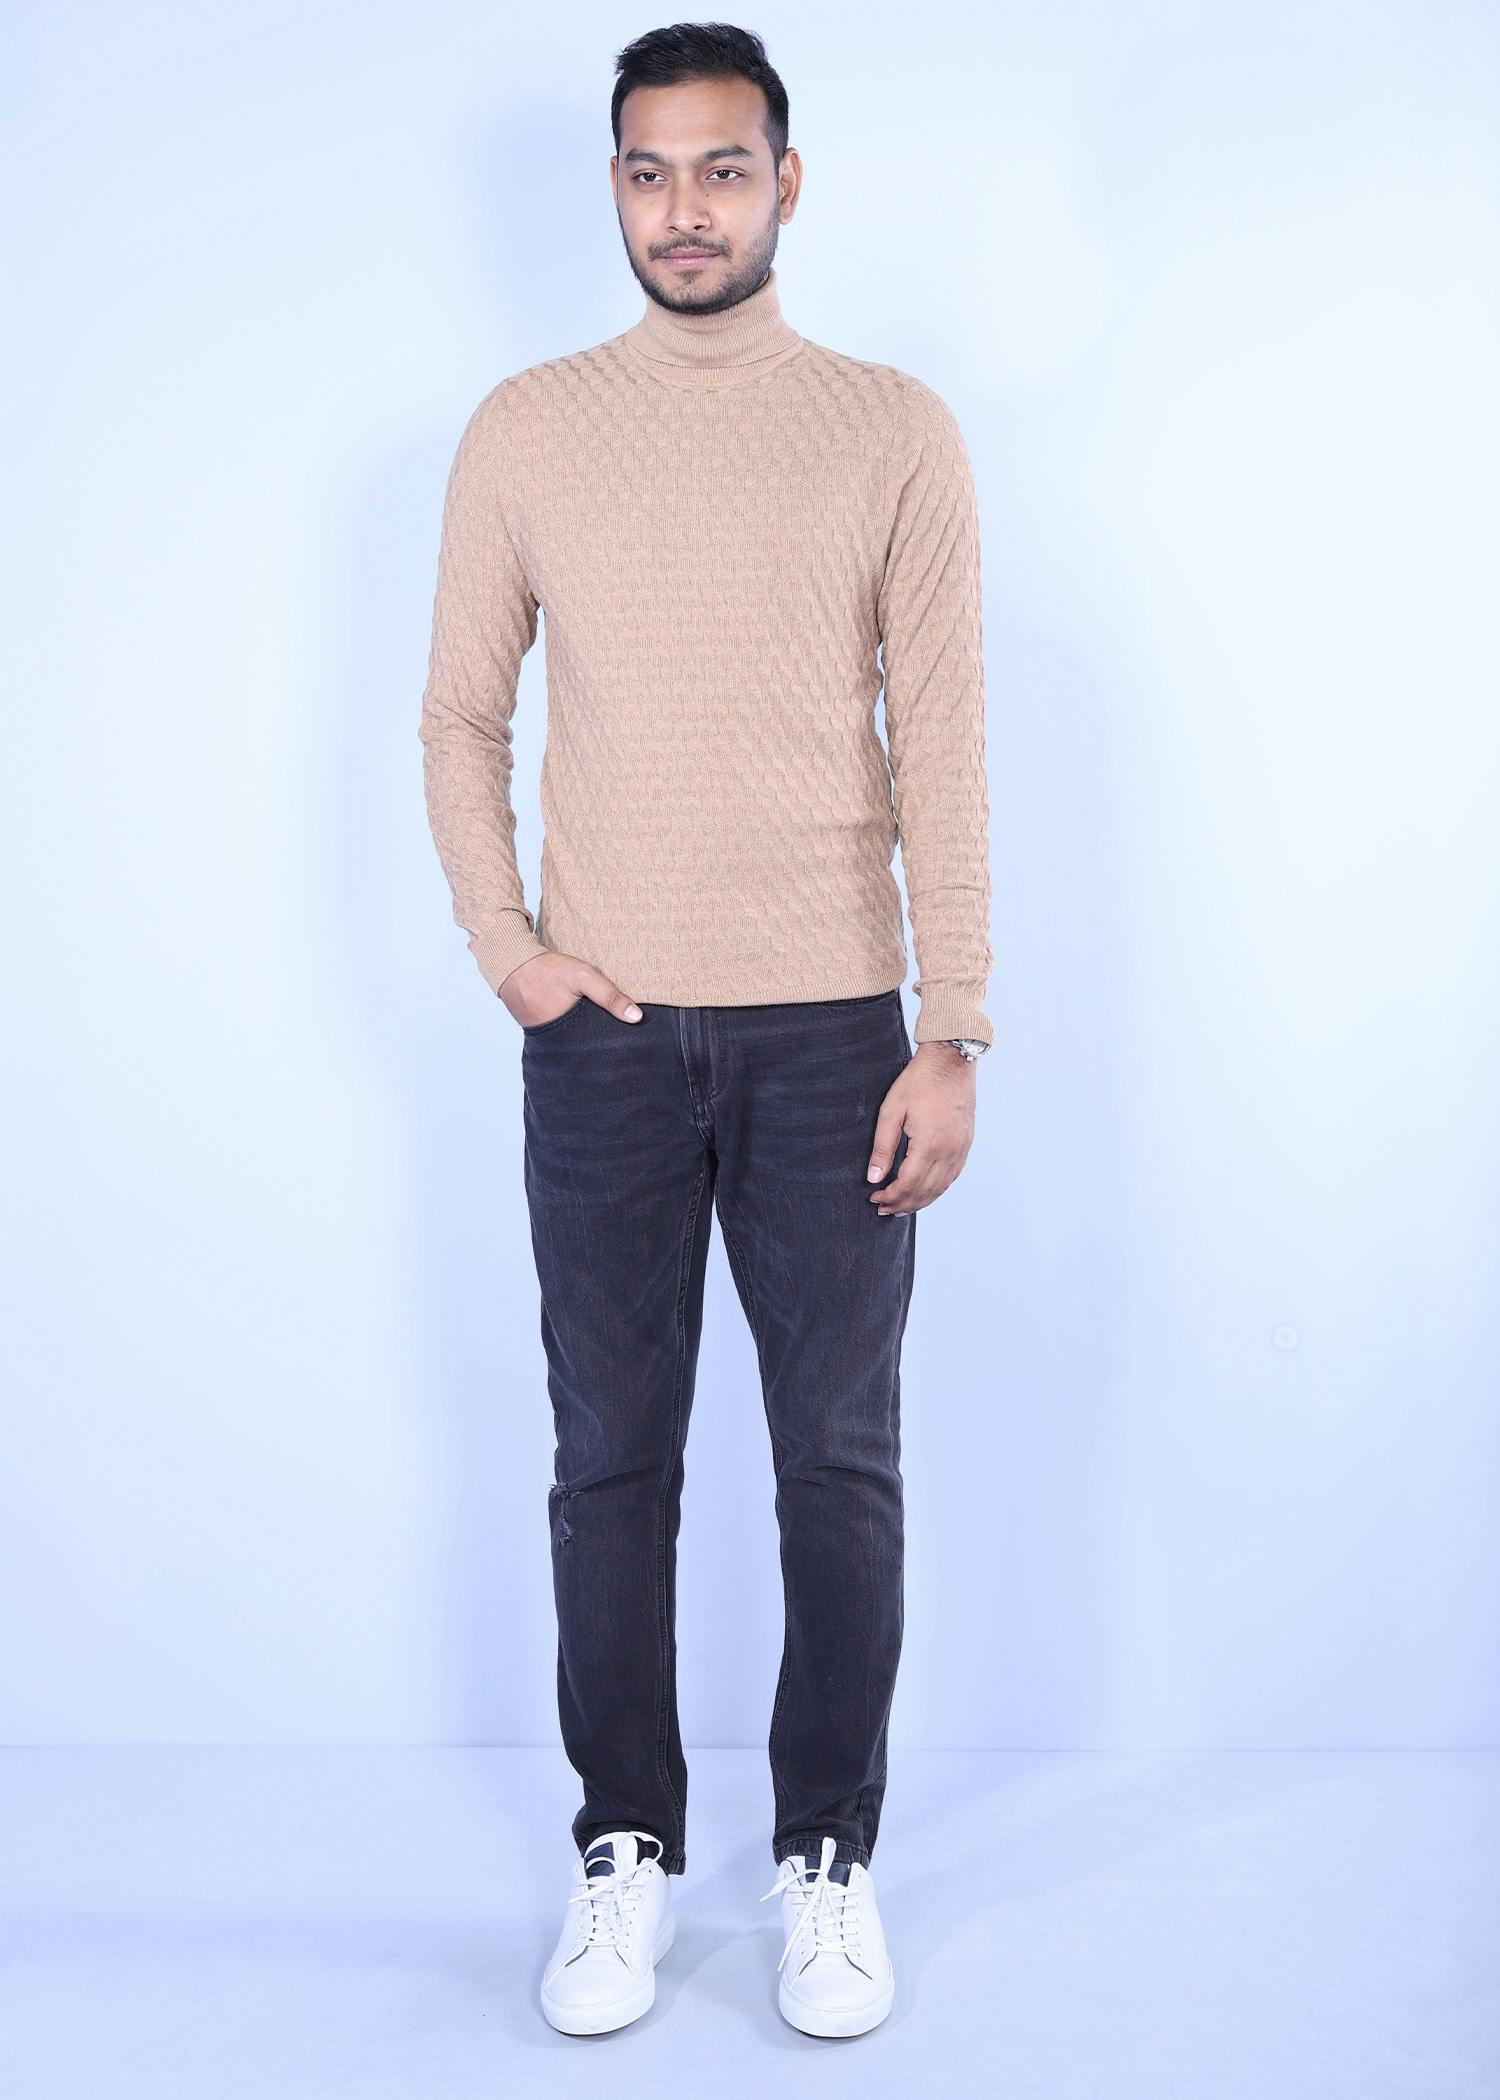 hornero ii sweater camel color full front view